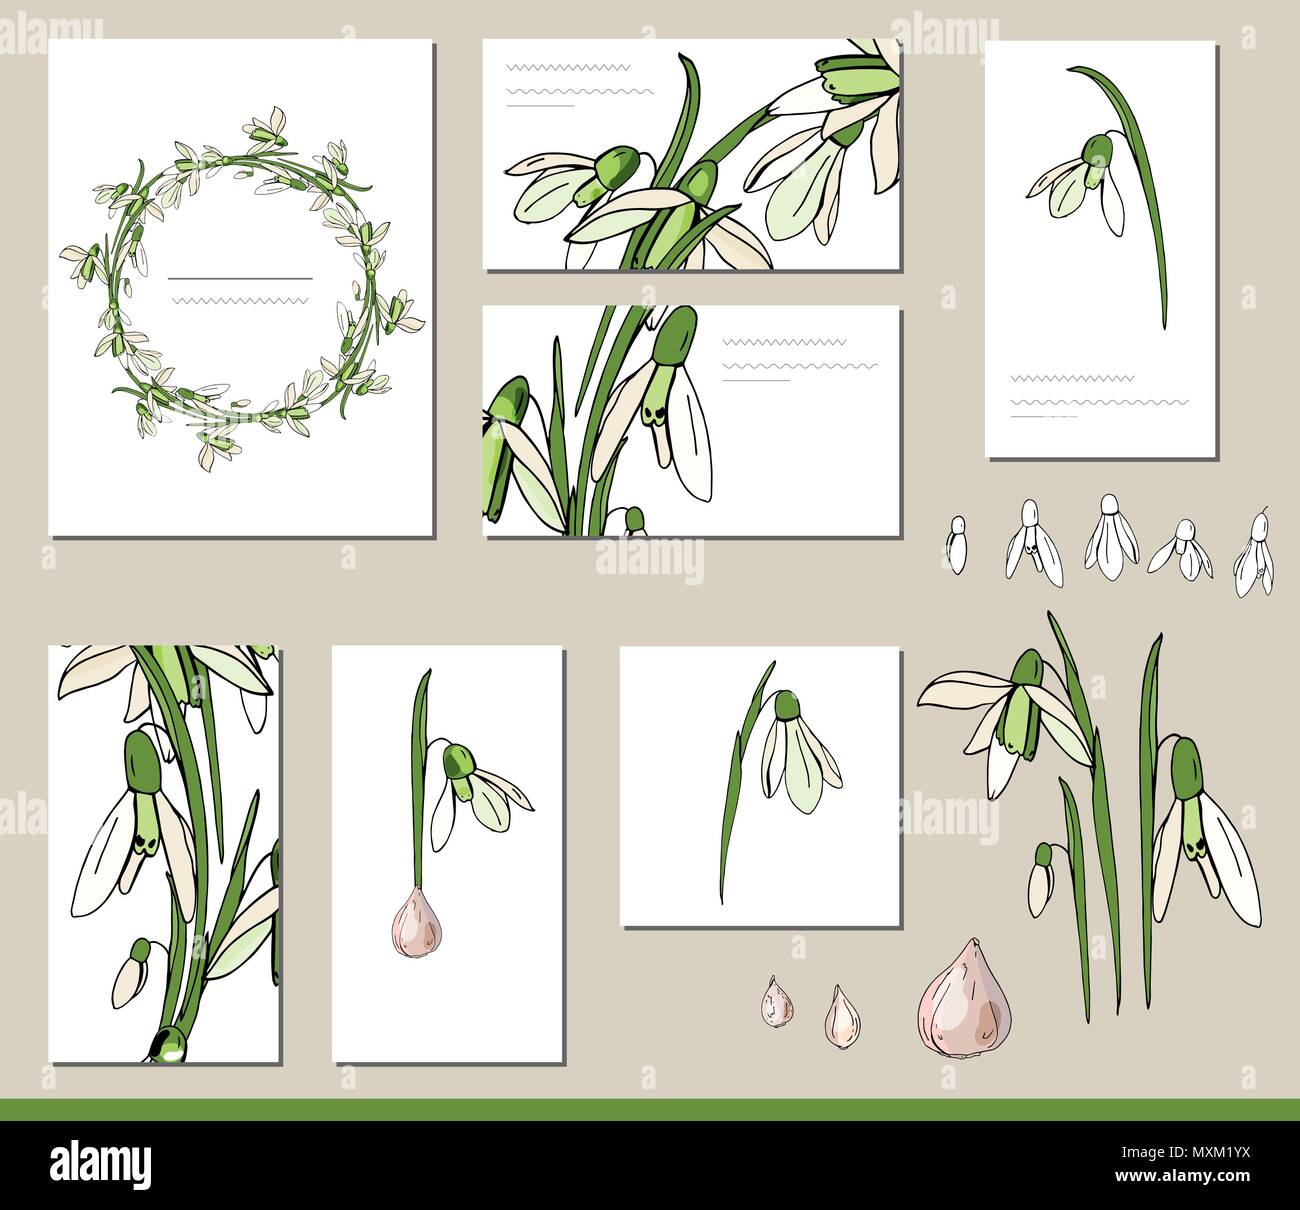 Snowdrop set with visitcards and greeting templates Stock Vector